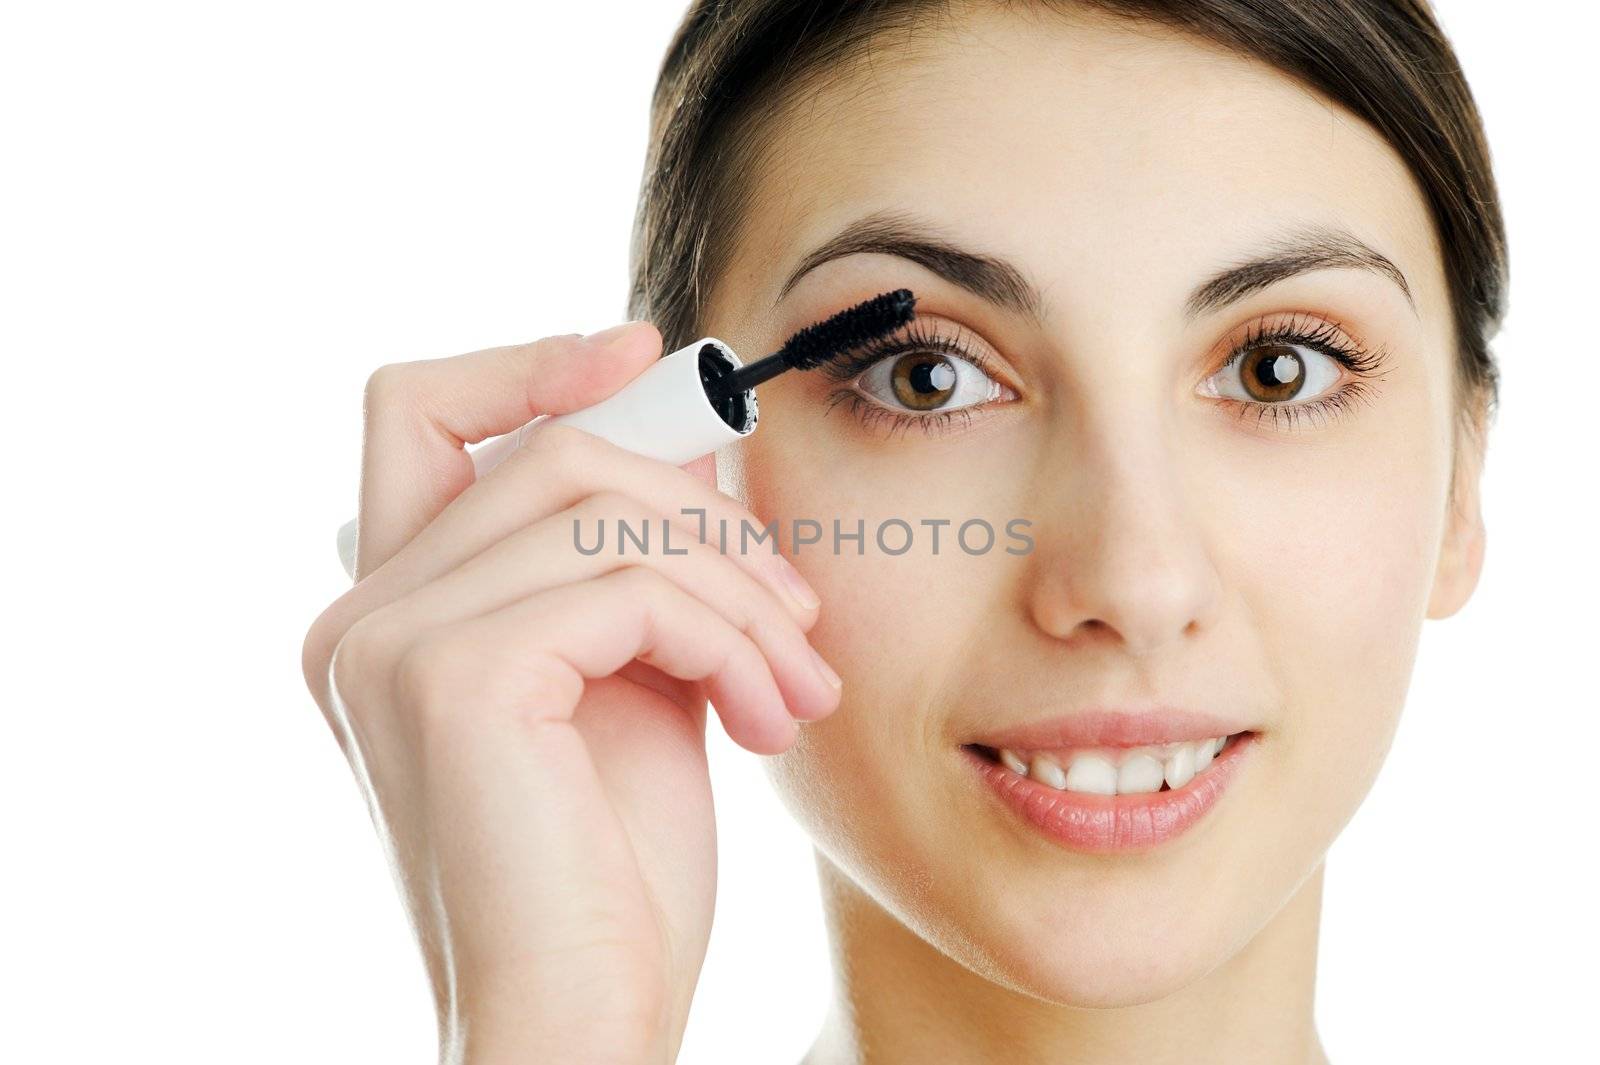 An image of a young woman with mascara